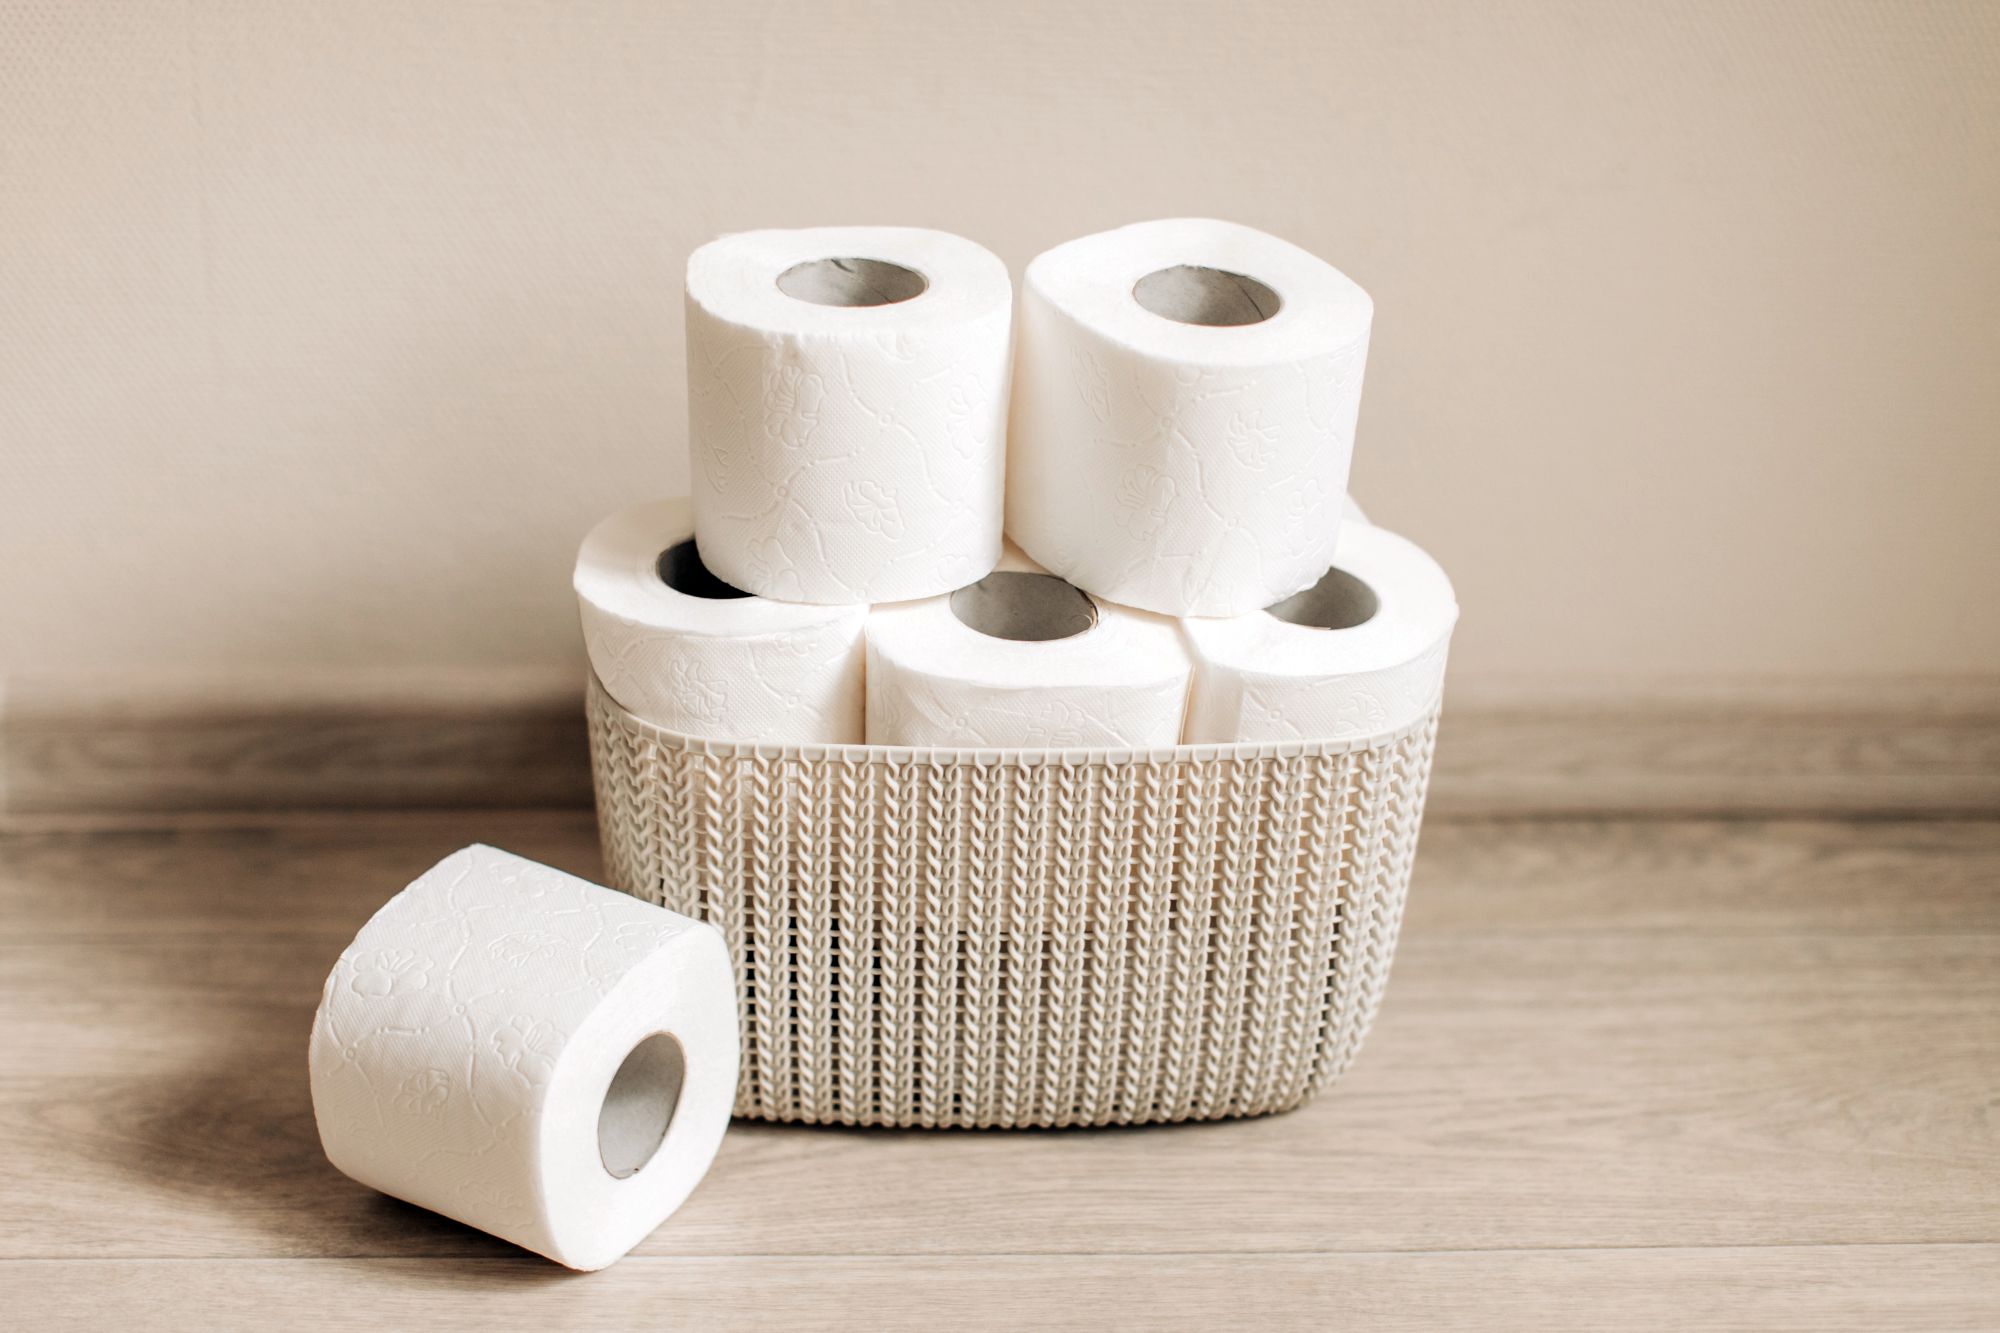 Rolls of bamboo toilet paper in a basket